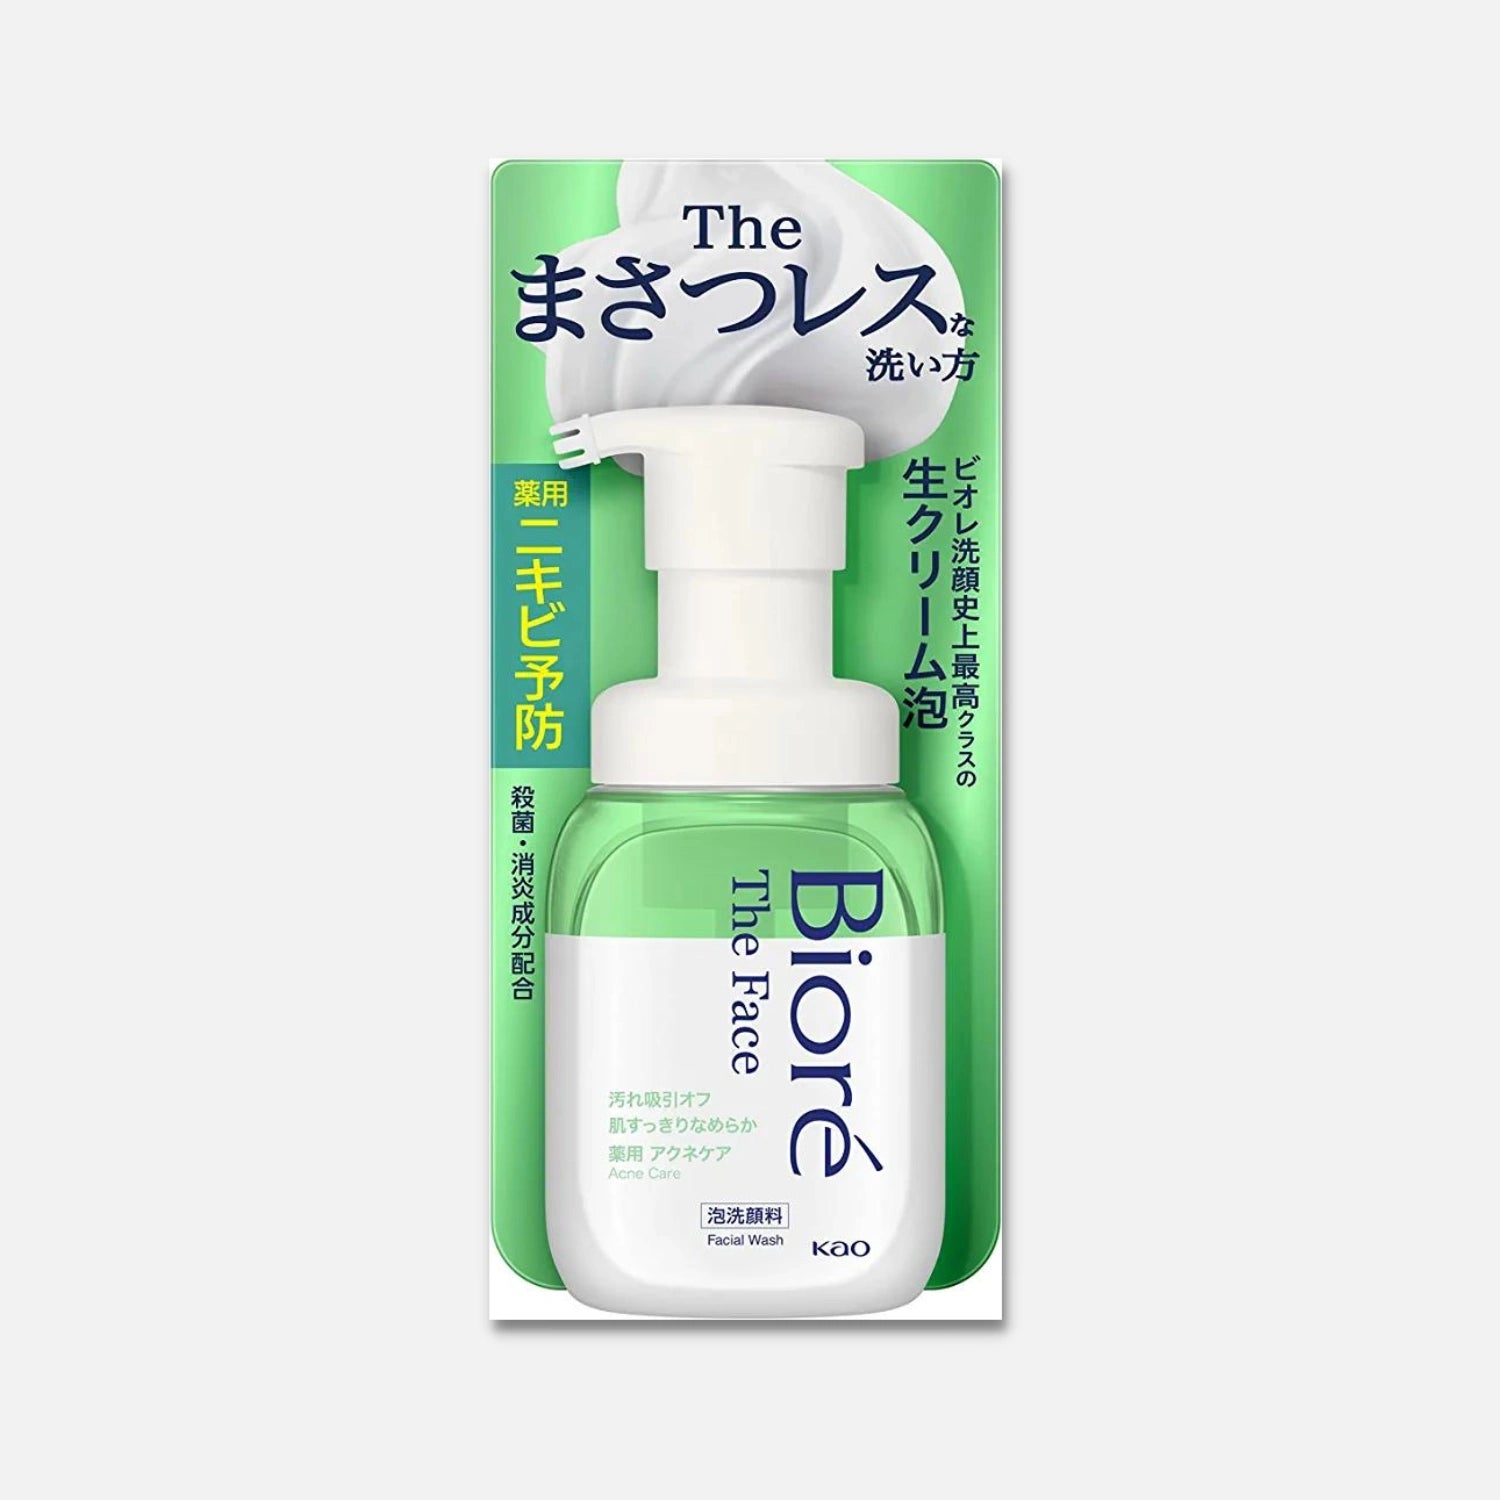 Biore The Face Medicated Acne Care Foam Facial Cleanser 200ml - Buy Me Japan